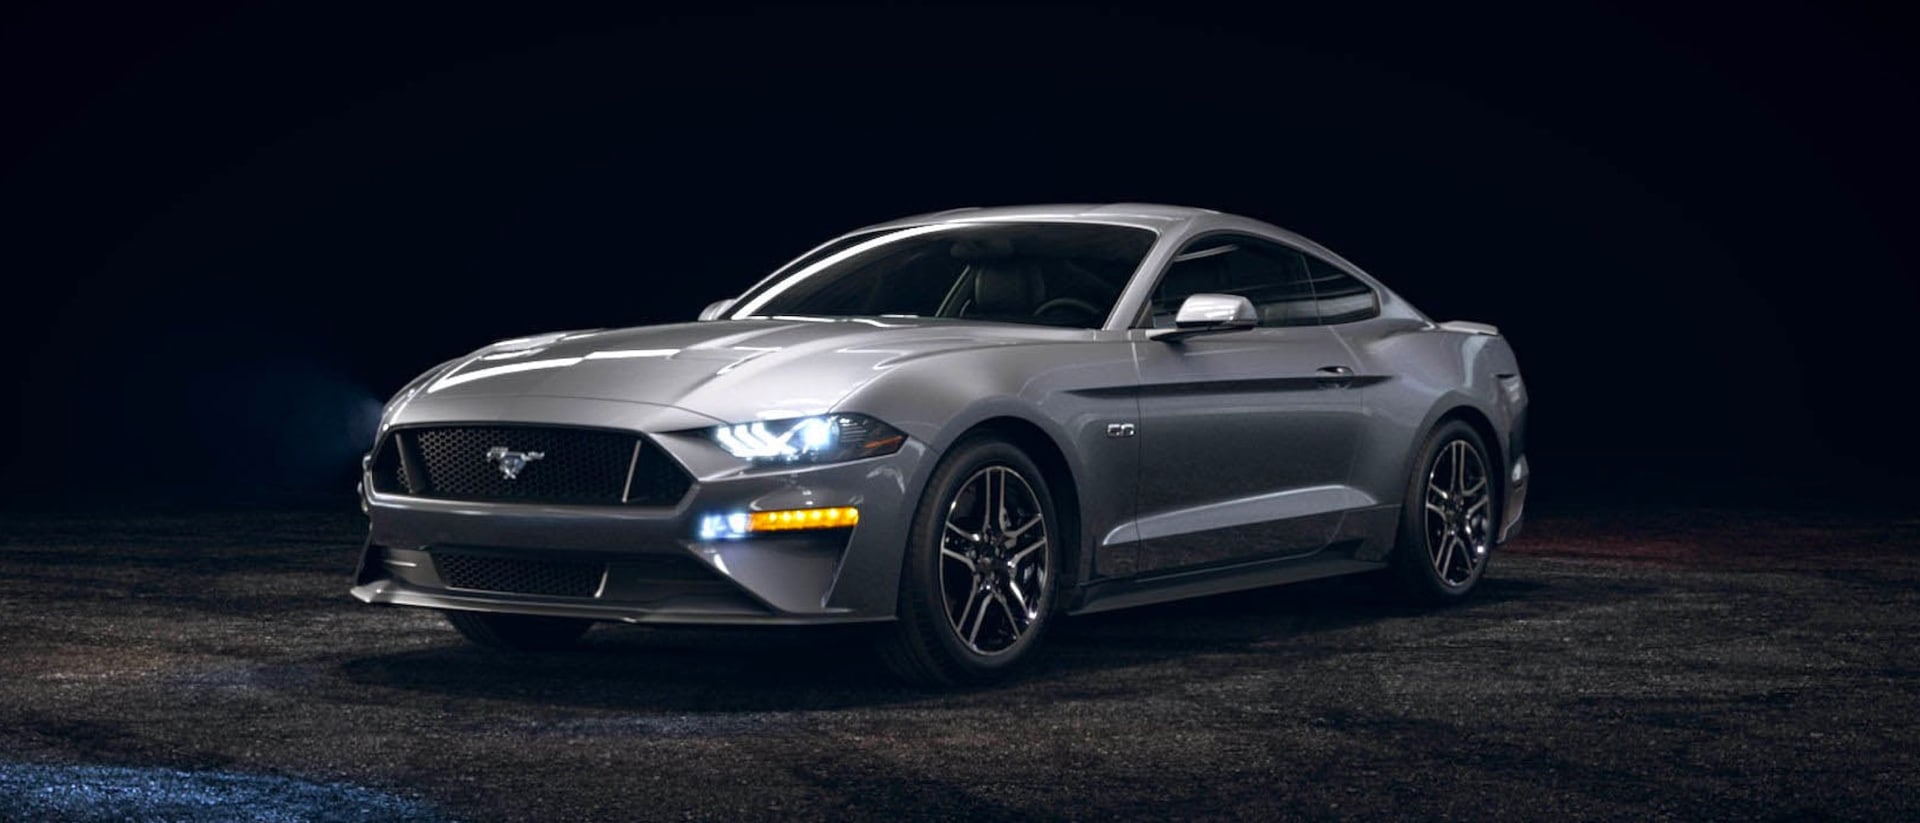 2021 Ford Mustang Colors, Price, Specs | Grieco Ford of Ft. Lauderdale